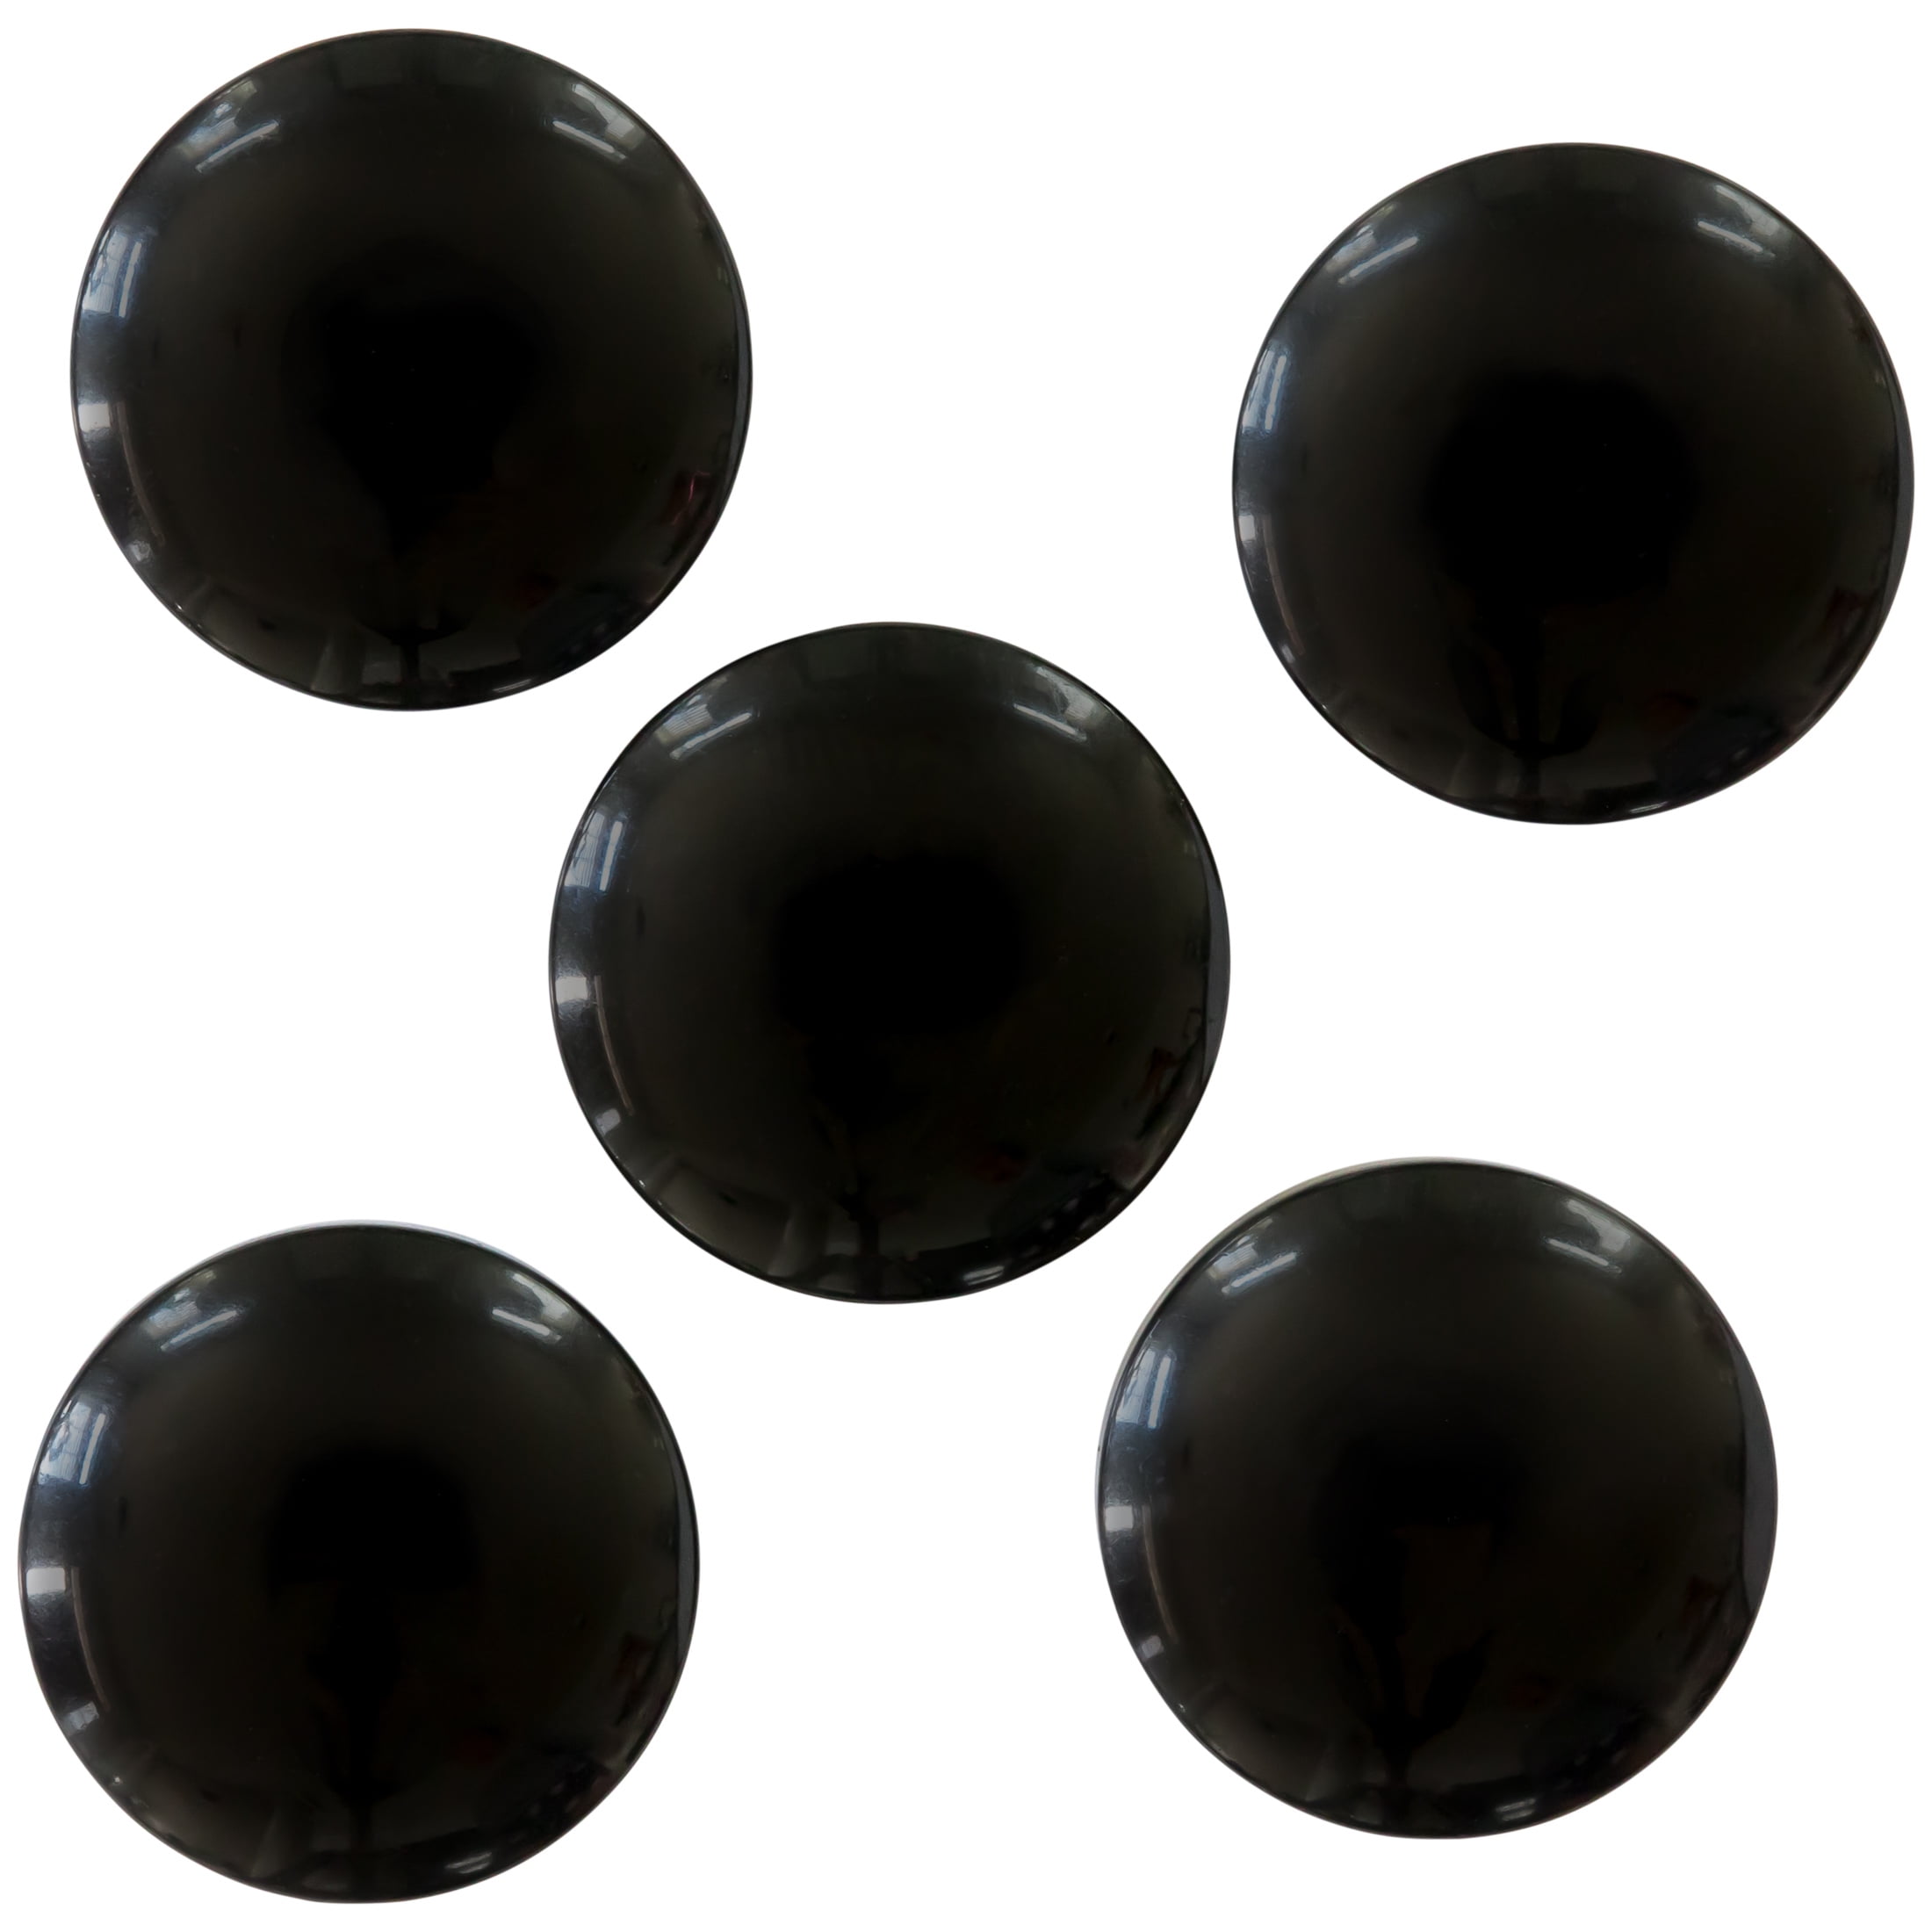 Le Bouton Round Black Shank Buttons NOS 6 Count - Ruby Lane